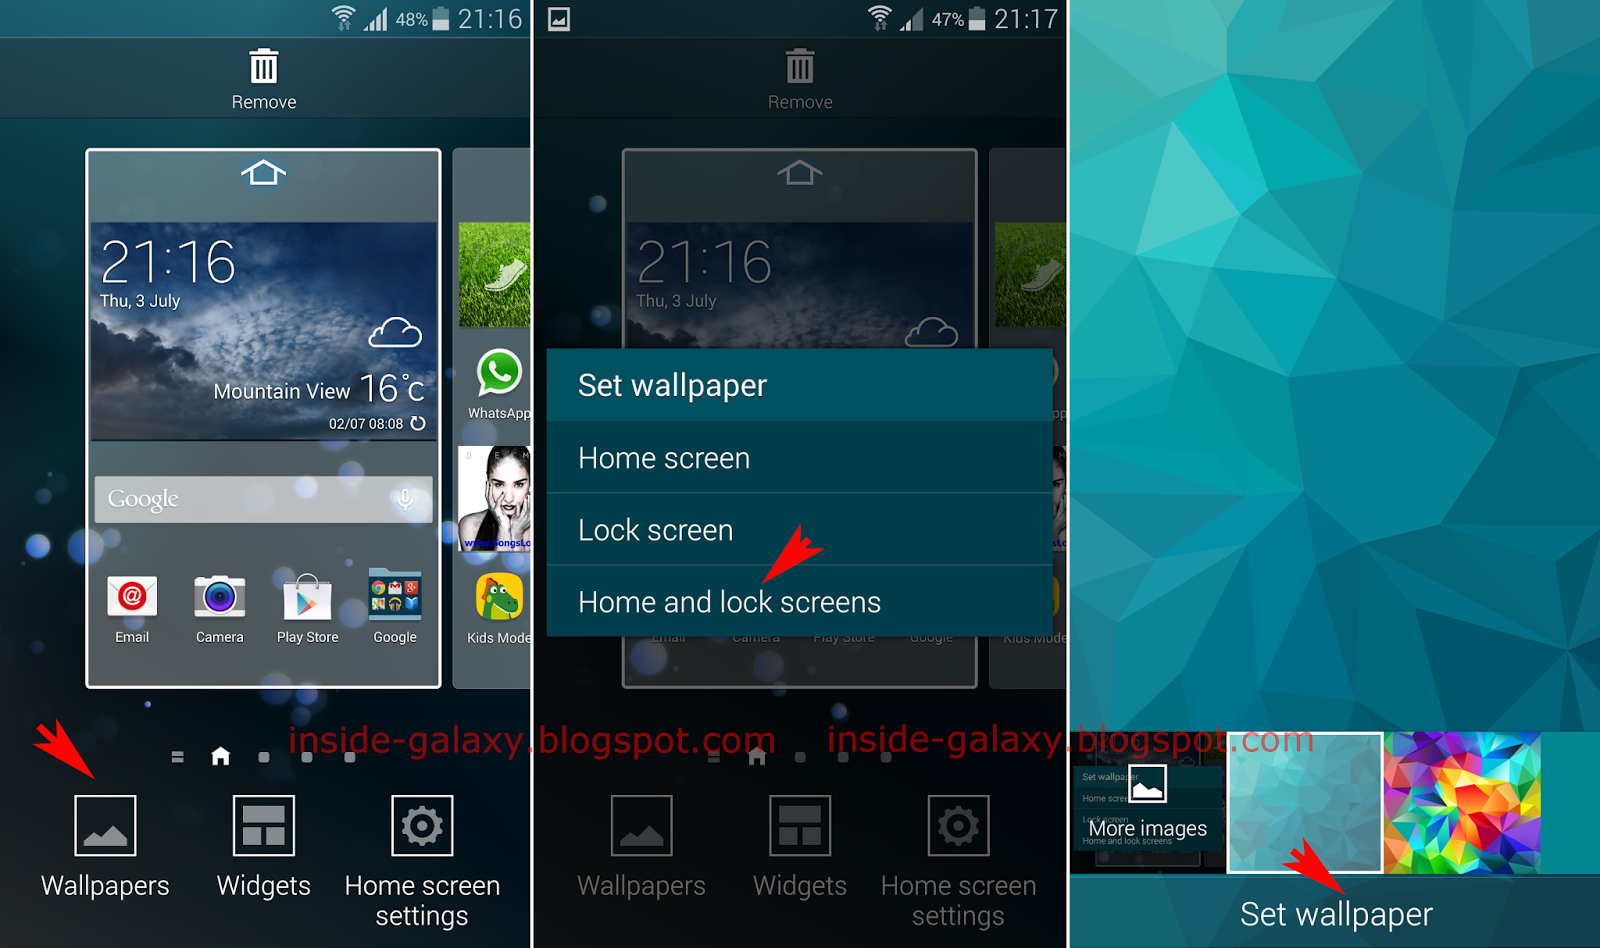 Inside Galaxy: Samsung Galaxy S5: How to Change Wallpaper in Android   Kitkat